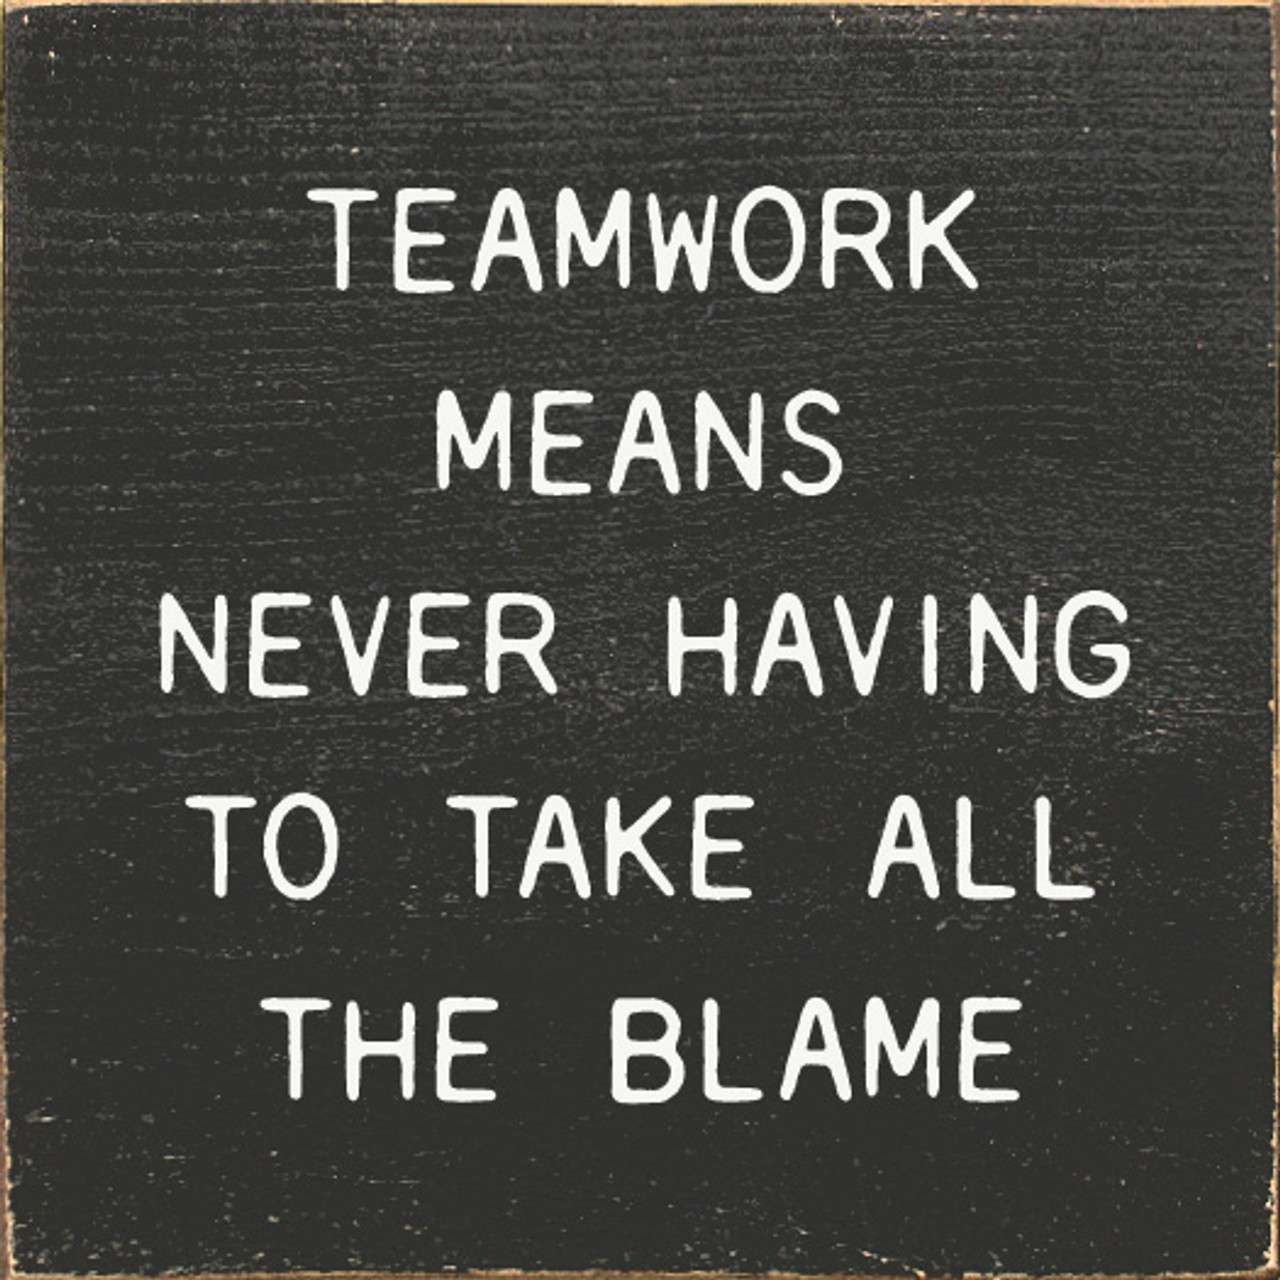 Teamwork means never having to take all the blame | Funny Wood Signs ...